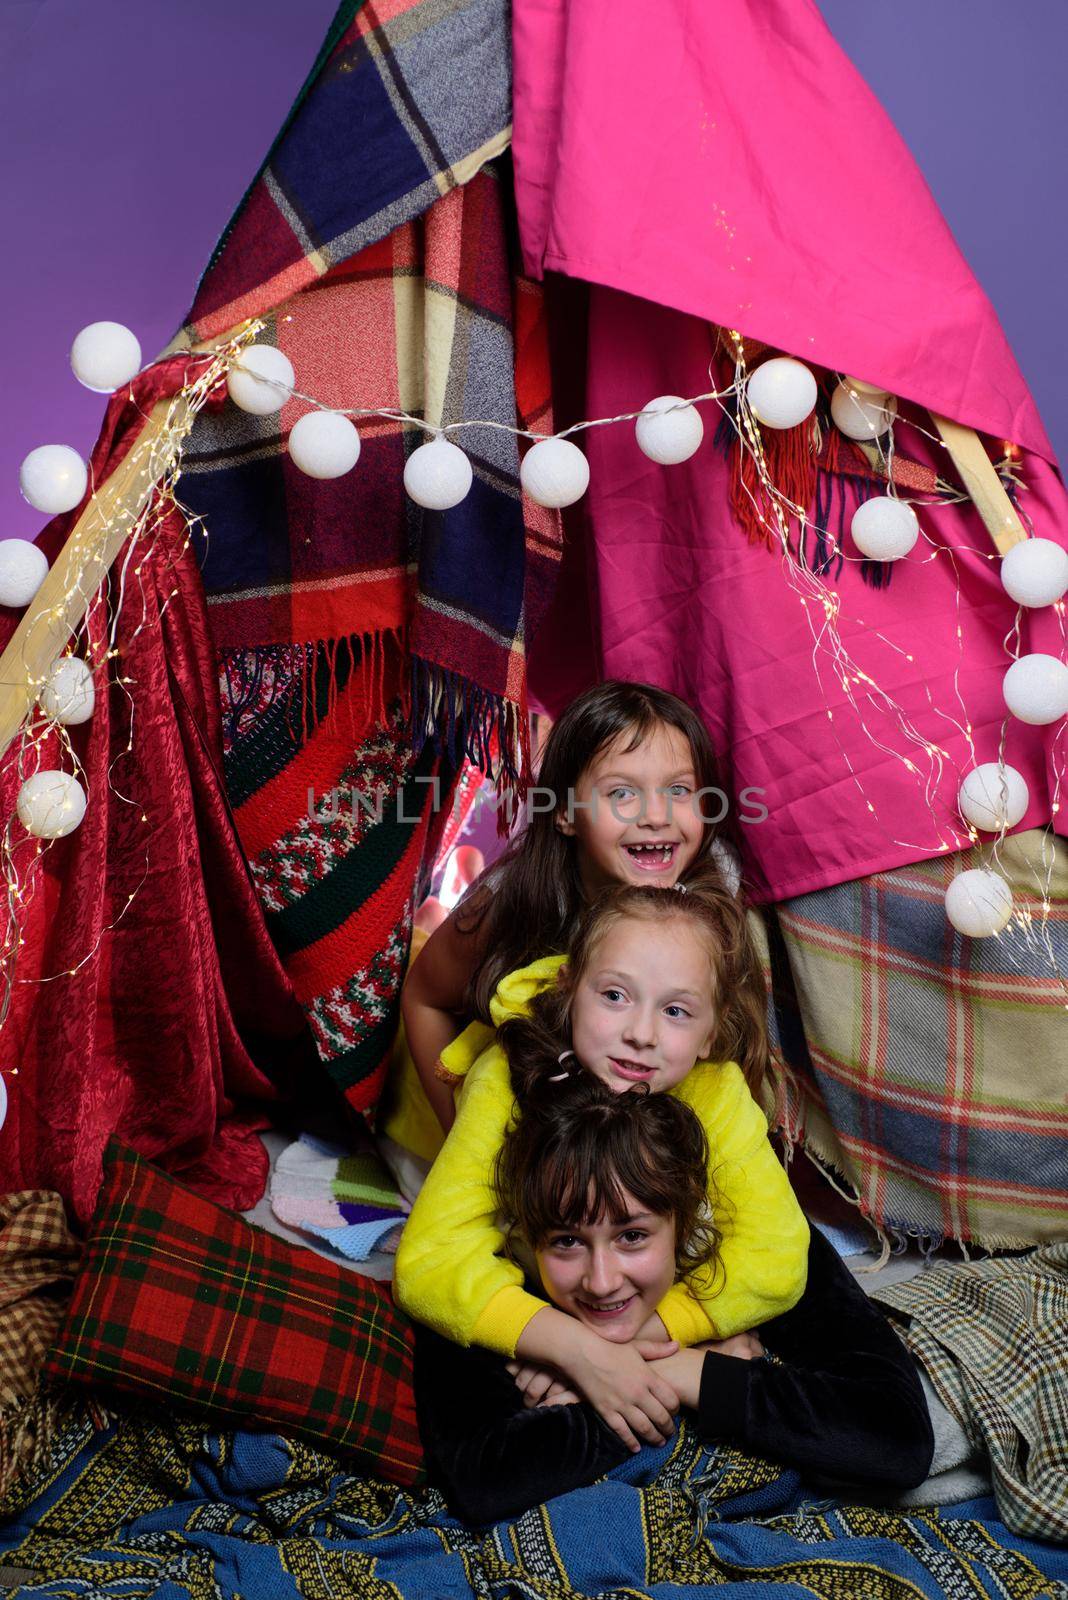 Kids embrace in home-made tent inside the living room before going to sleep. Child pajama party. Pajamas for kids. Little Girls in tipi house. Sisters or best friends spend time